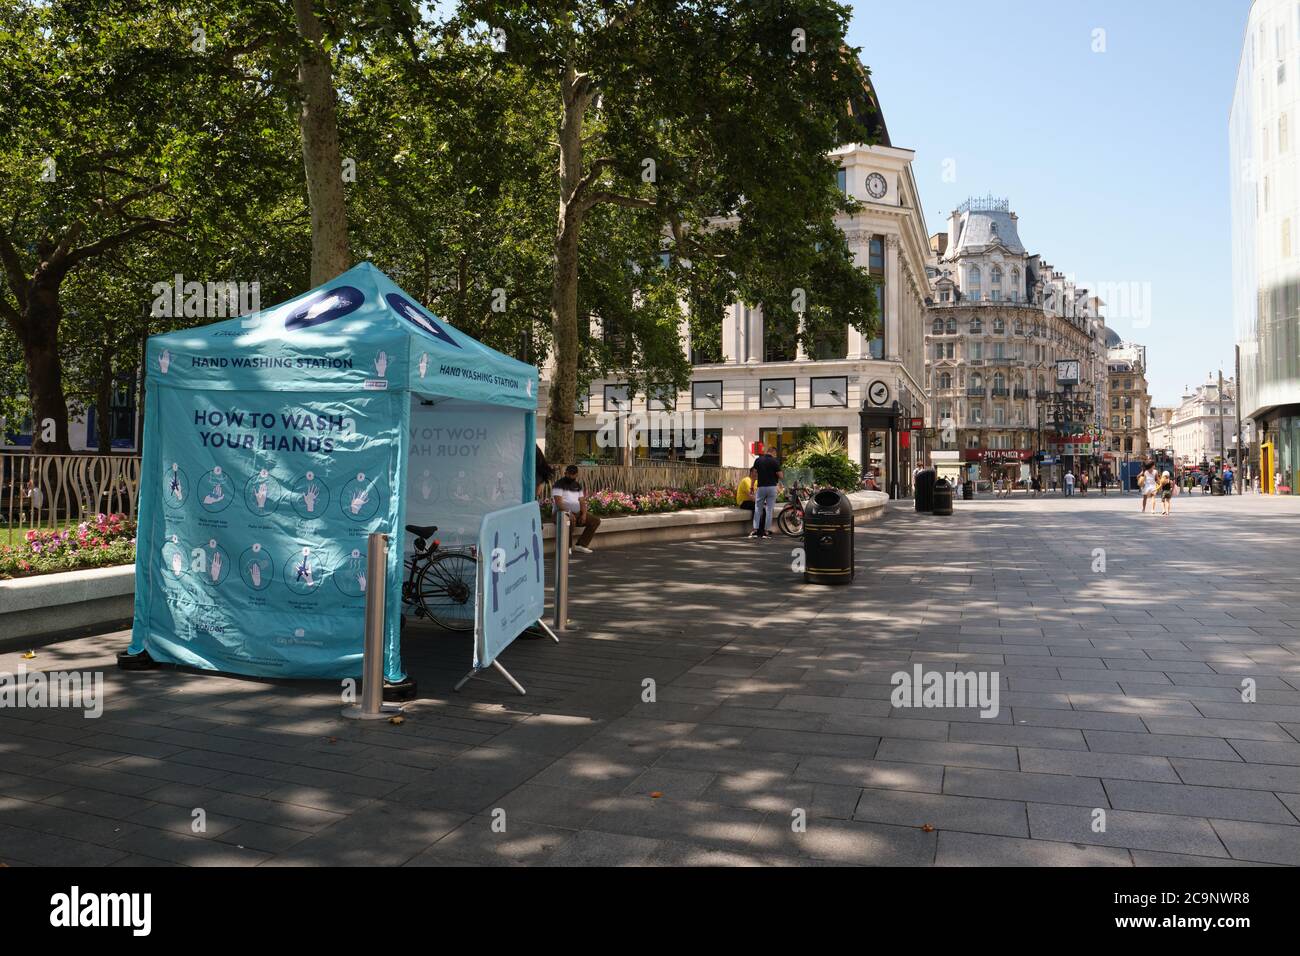 Hand Washing Station at Leicester Square in London, UK to provide free masks, gloves and hand sanitizer to the public amid COVID-19 pandemic. Stock Photo